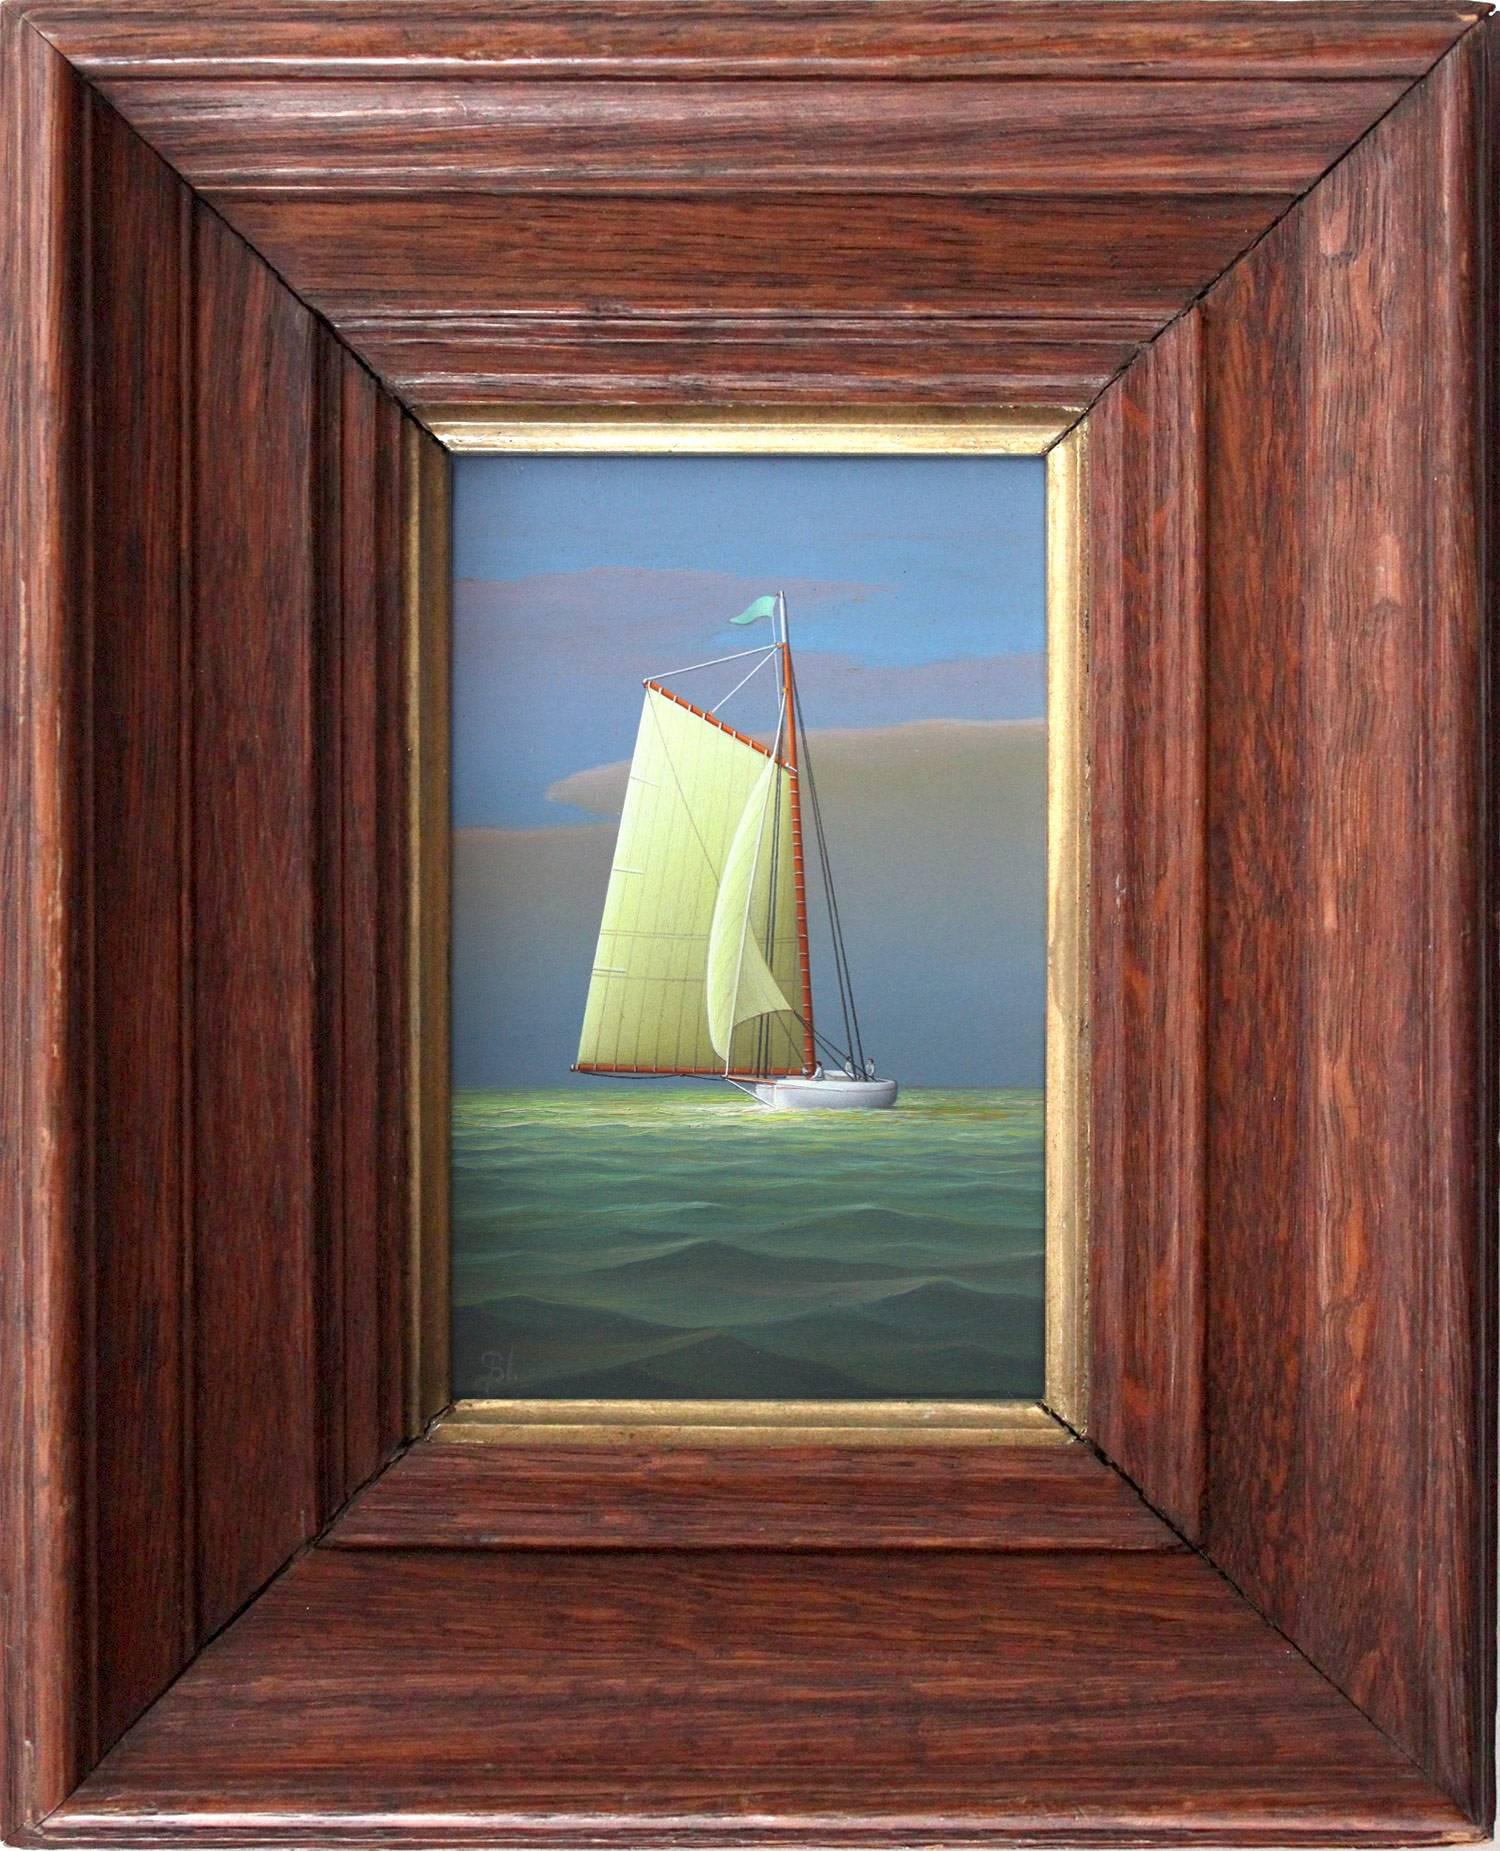 George Nemethy Figurative Painting - "Sailing in the Afternoon" Realist Oil Painting on Board of Sailboat in Open Sea